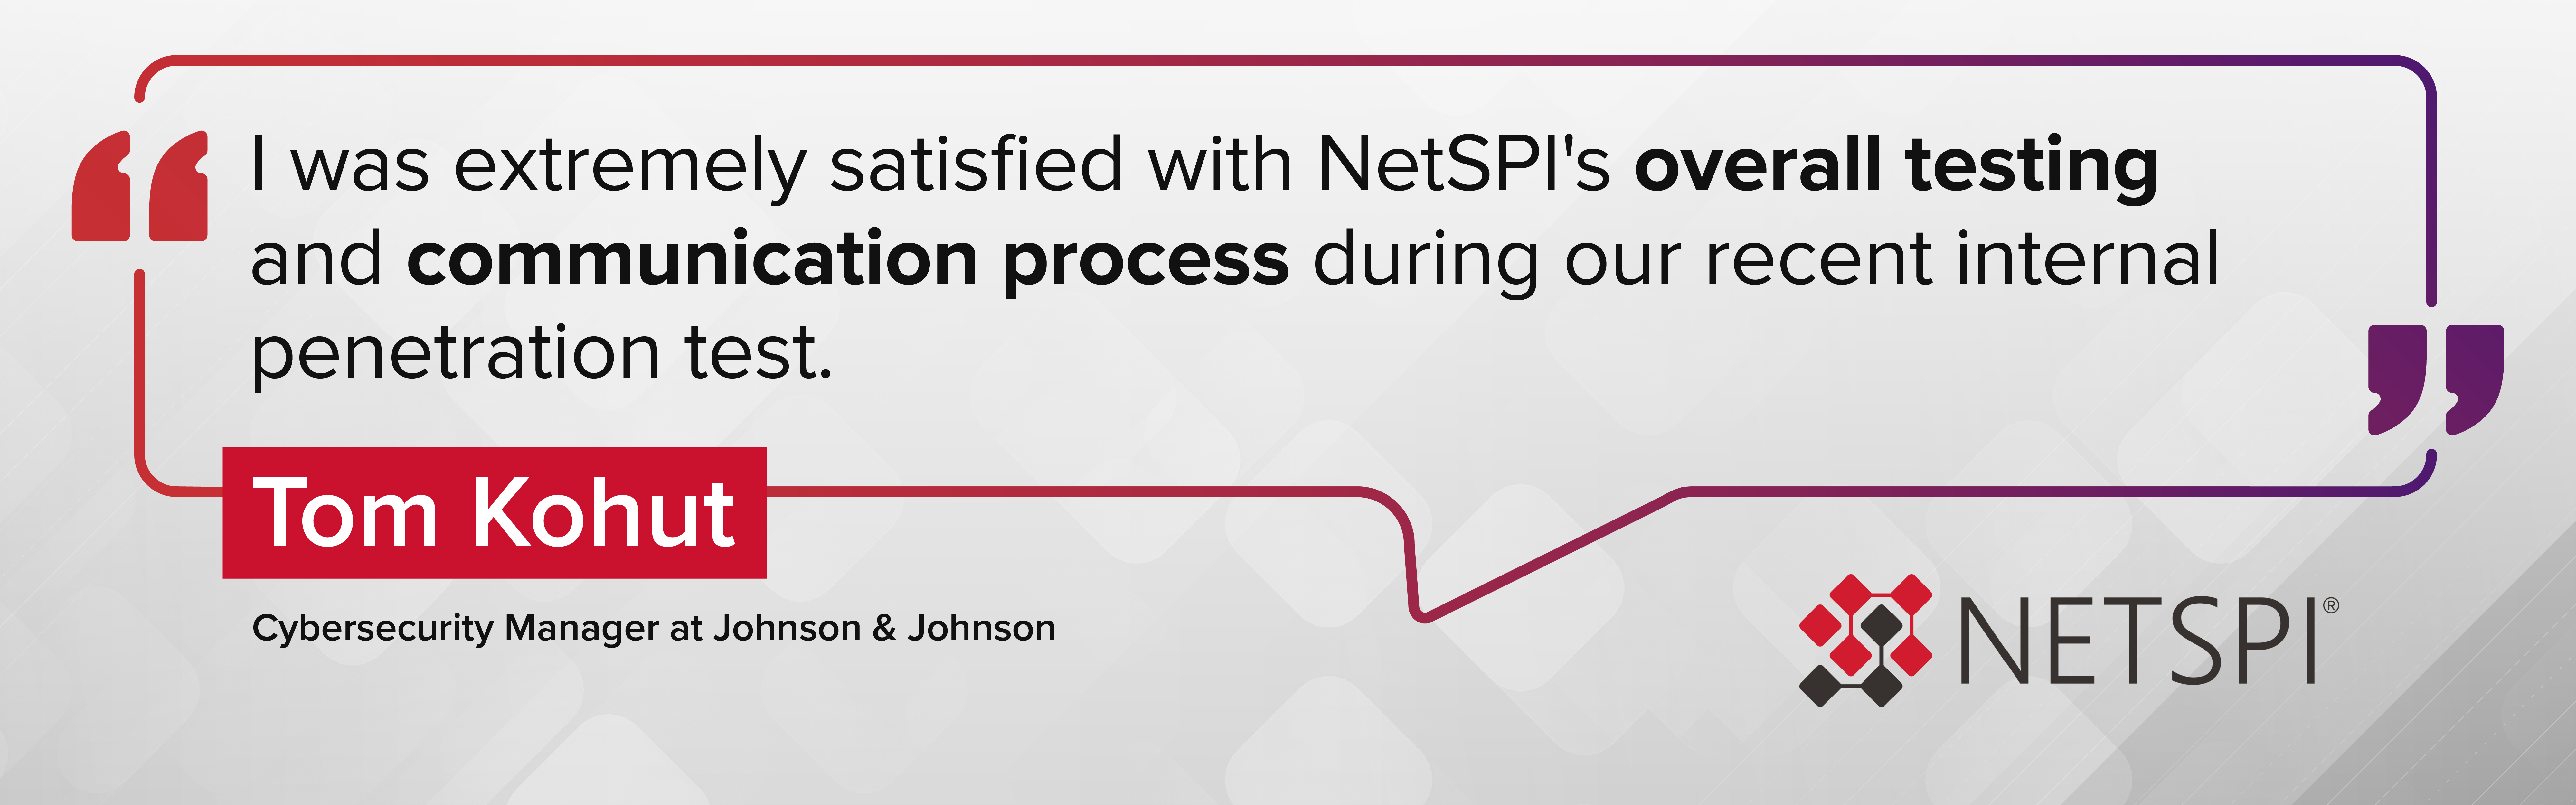 "I was extremely satisfied with NetSPI's overall testing and communication process during our recent internal penetration test." – Tom Kohl, Cybersecurity Manager at Johnson & Johnson